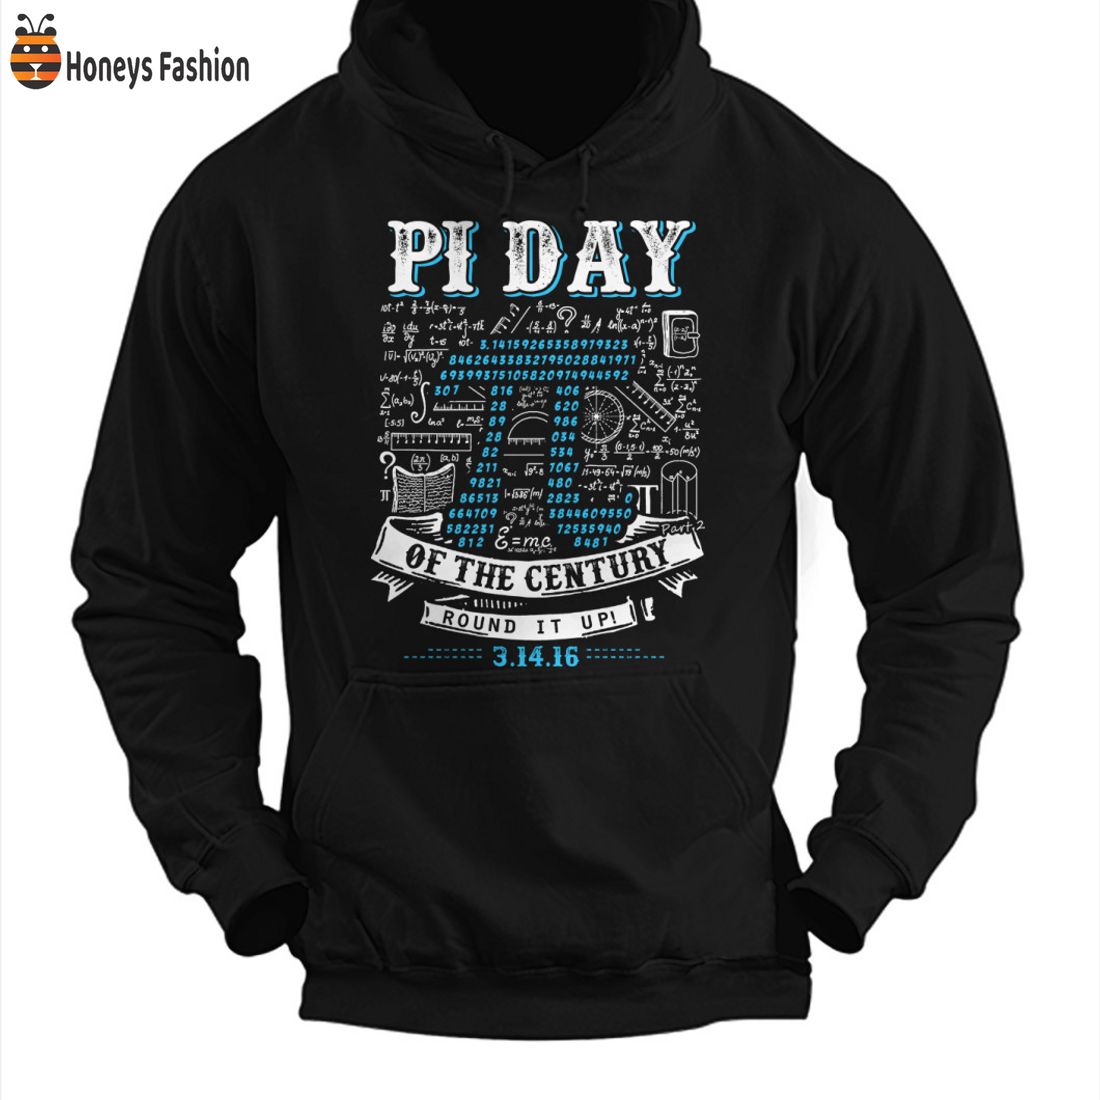 BEST Pi Day Of The Century Round It Up 2D Hoodie T Shirt